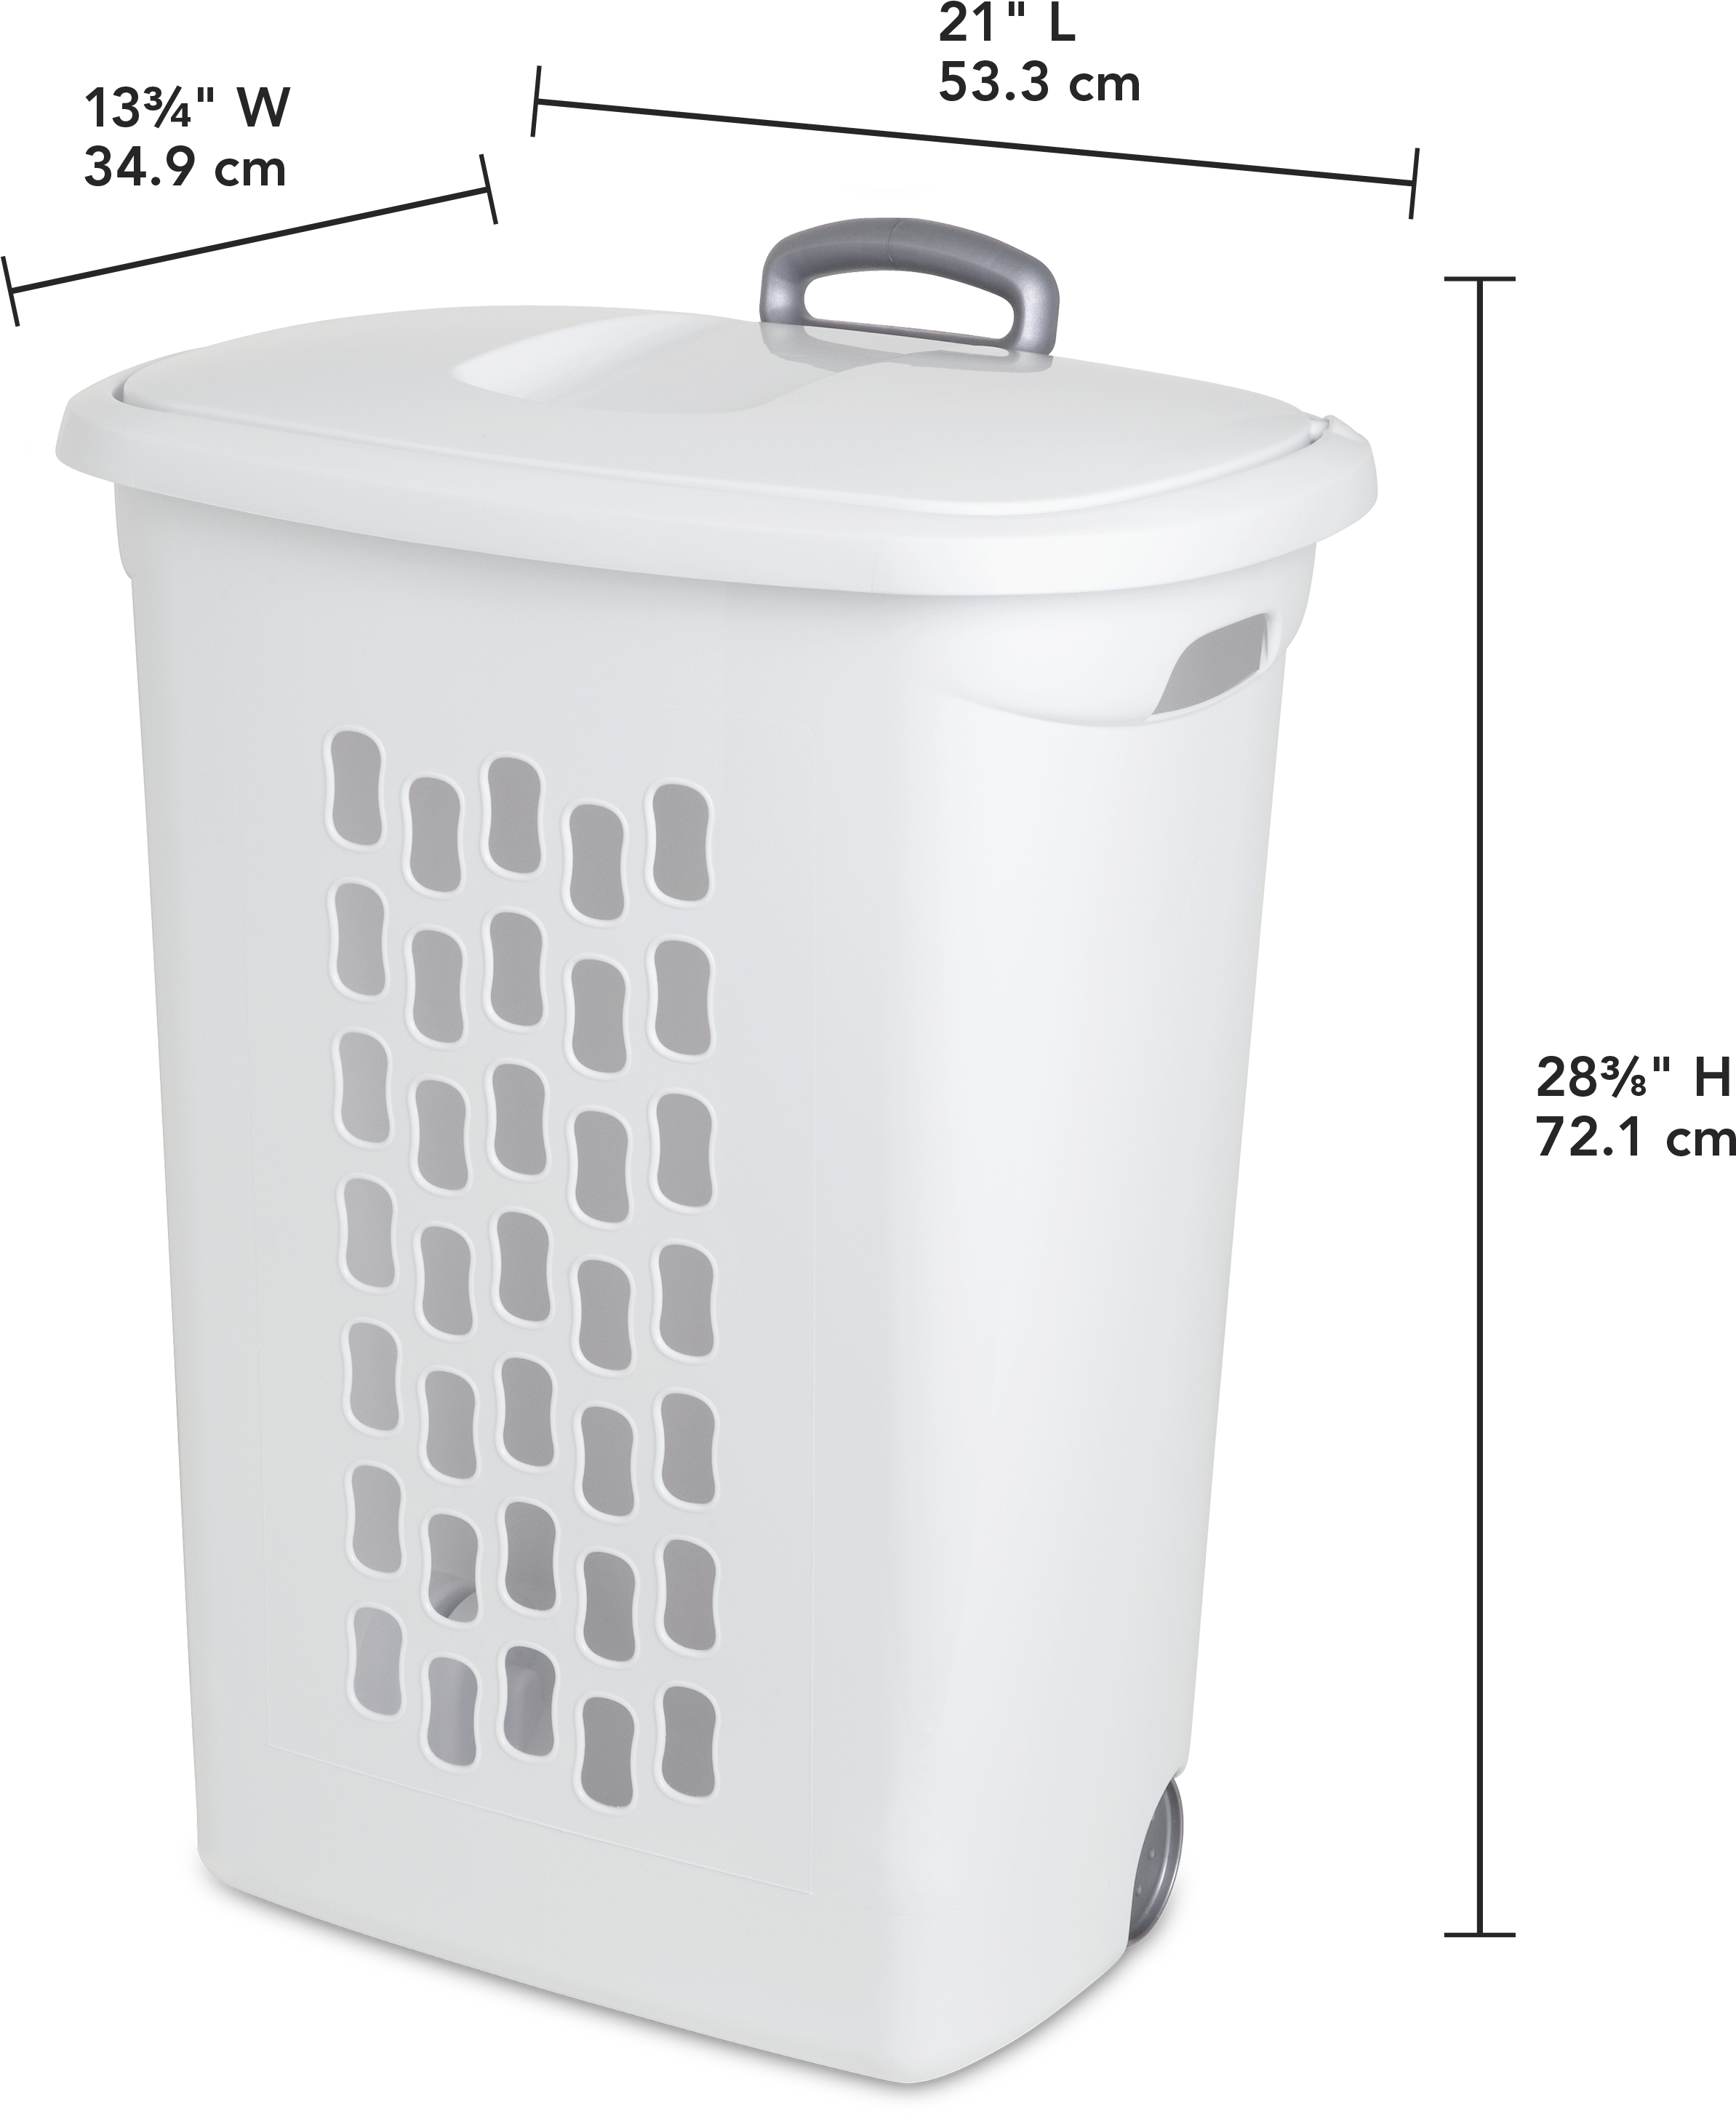 A White Plastic Trash Can With A Lid